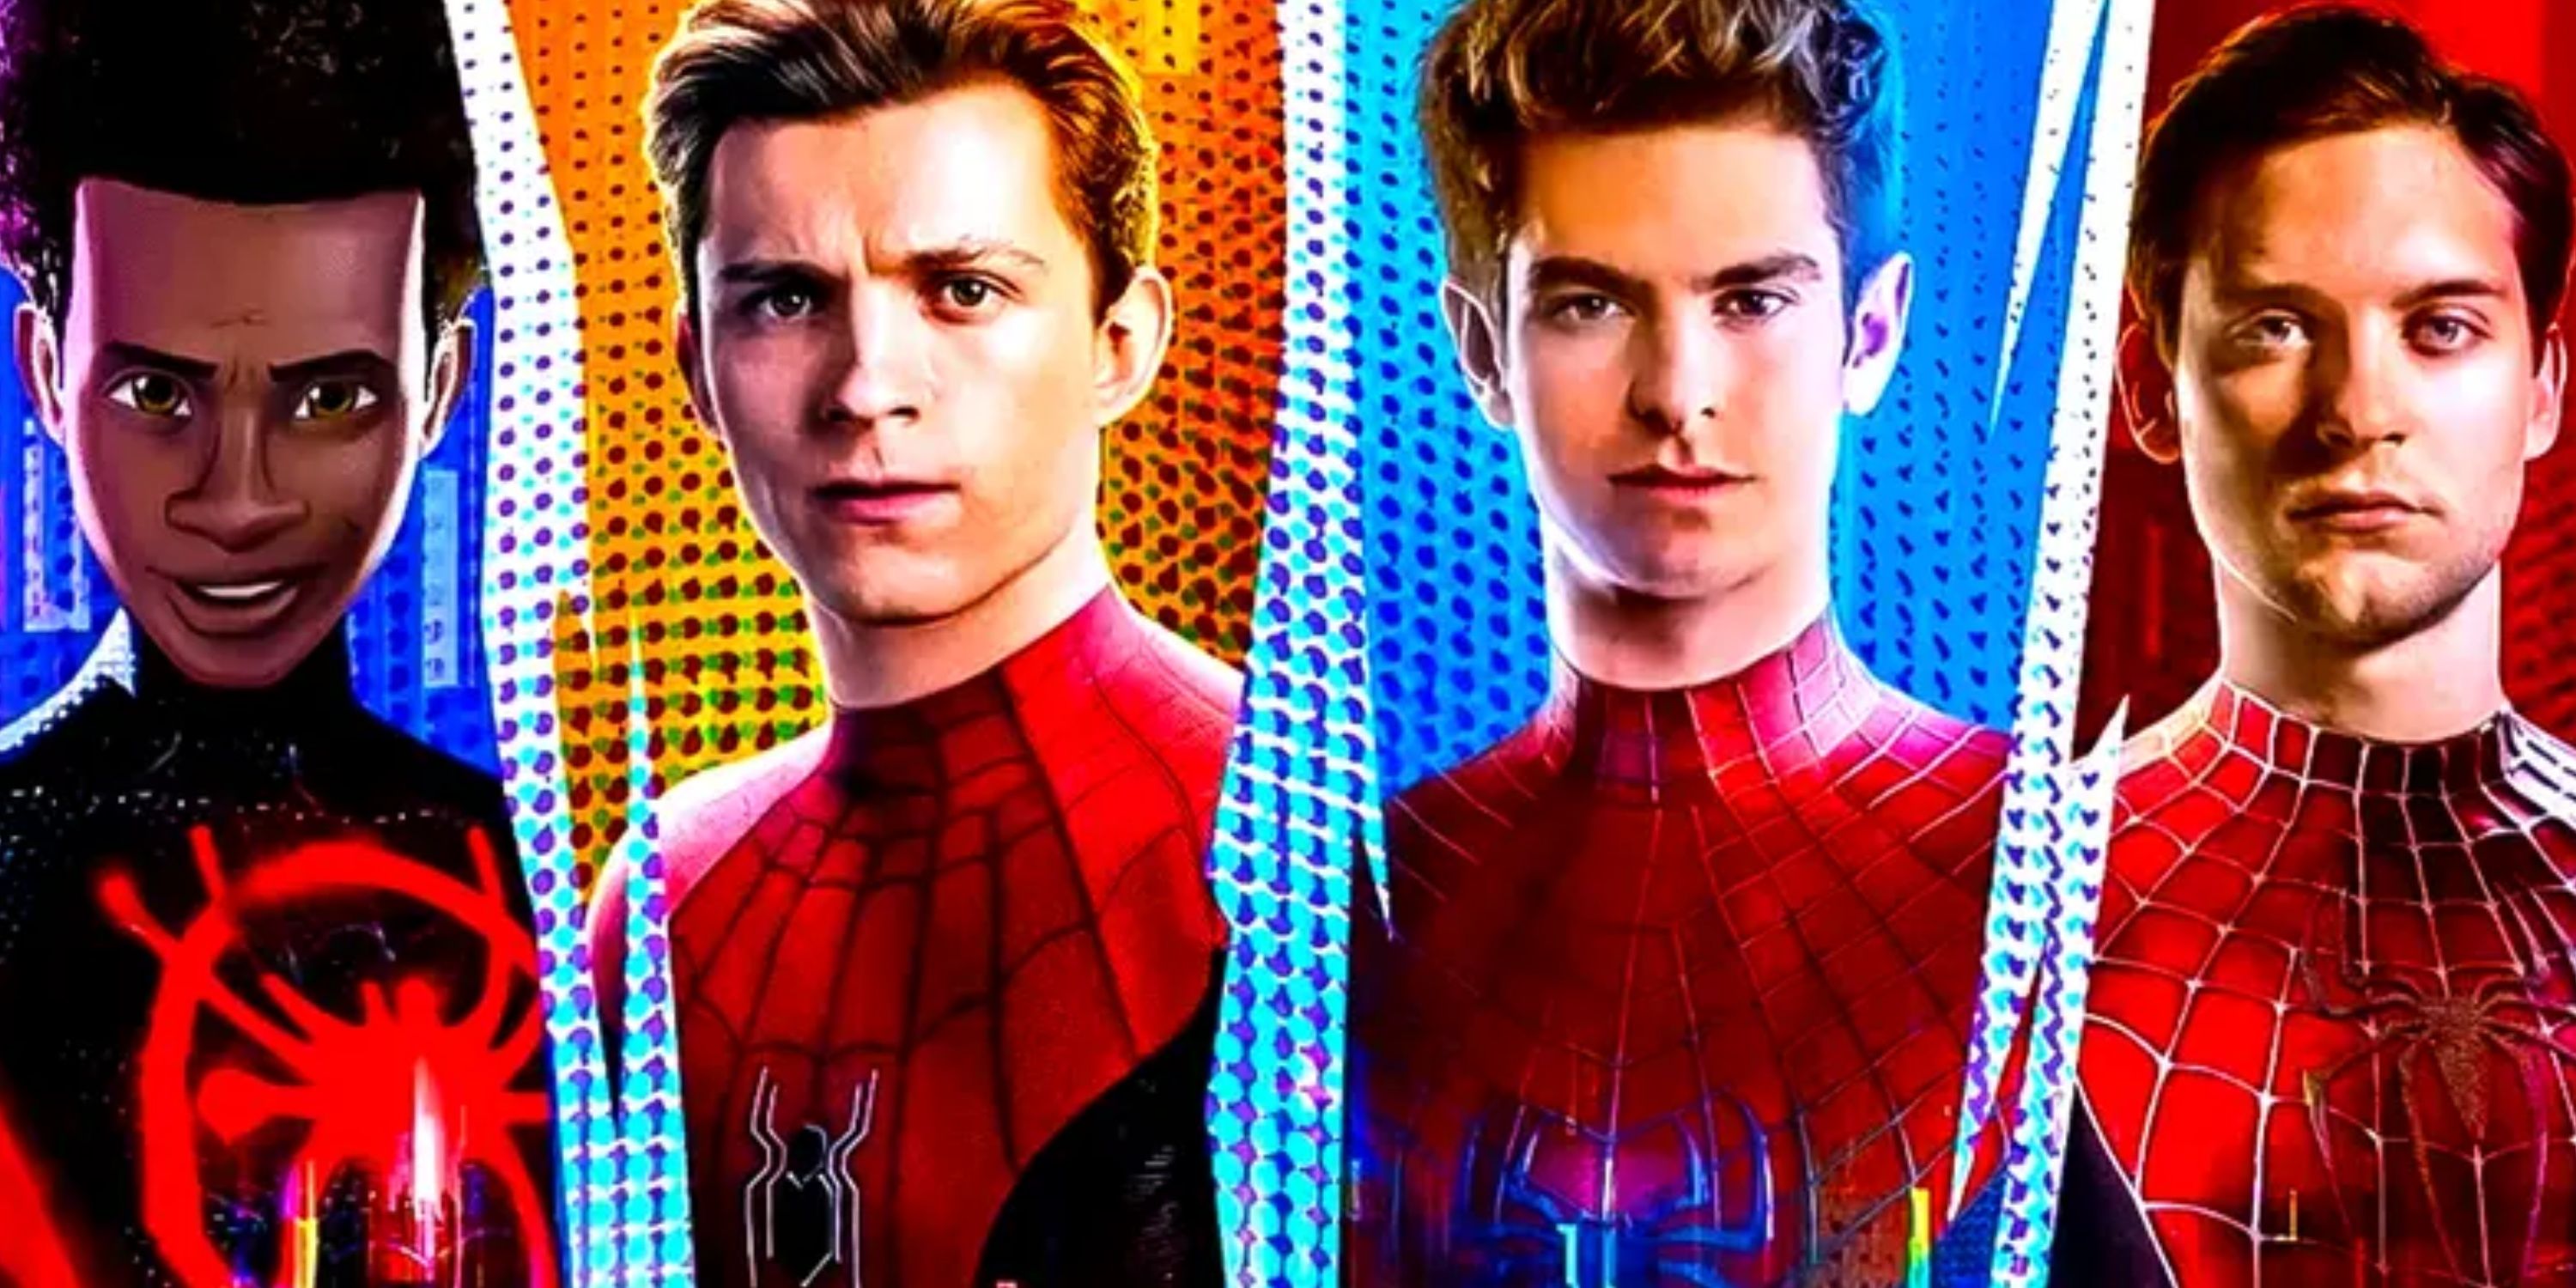 from left to right, shameik moore spider-man, tom holland spider-man, andrew garfield spider-man, tobey maguire spider-man